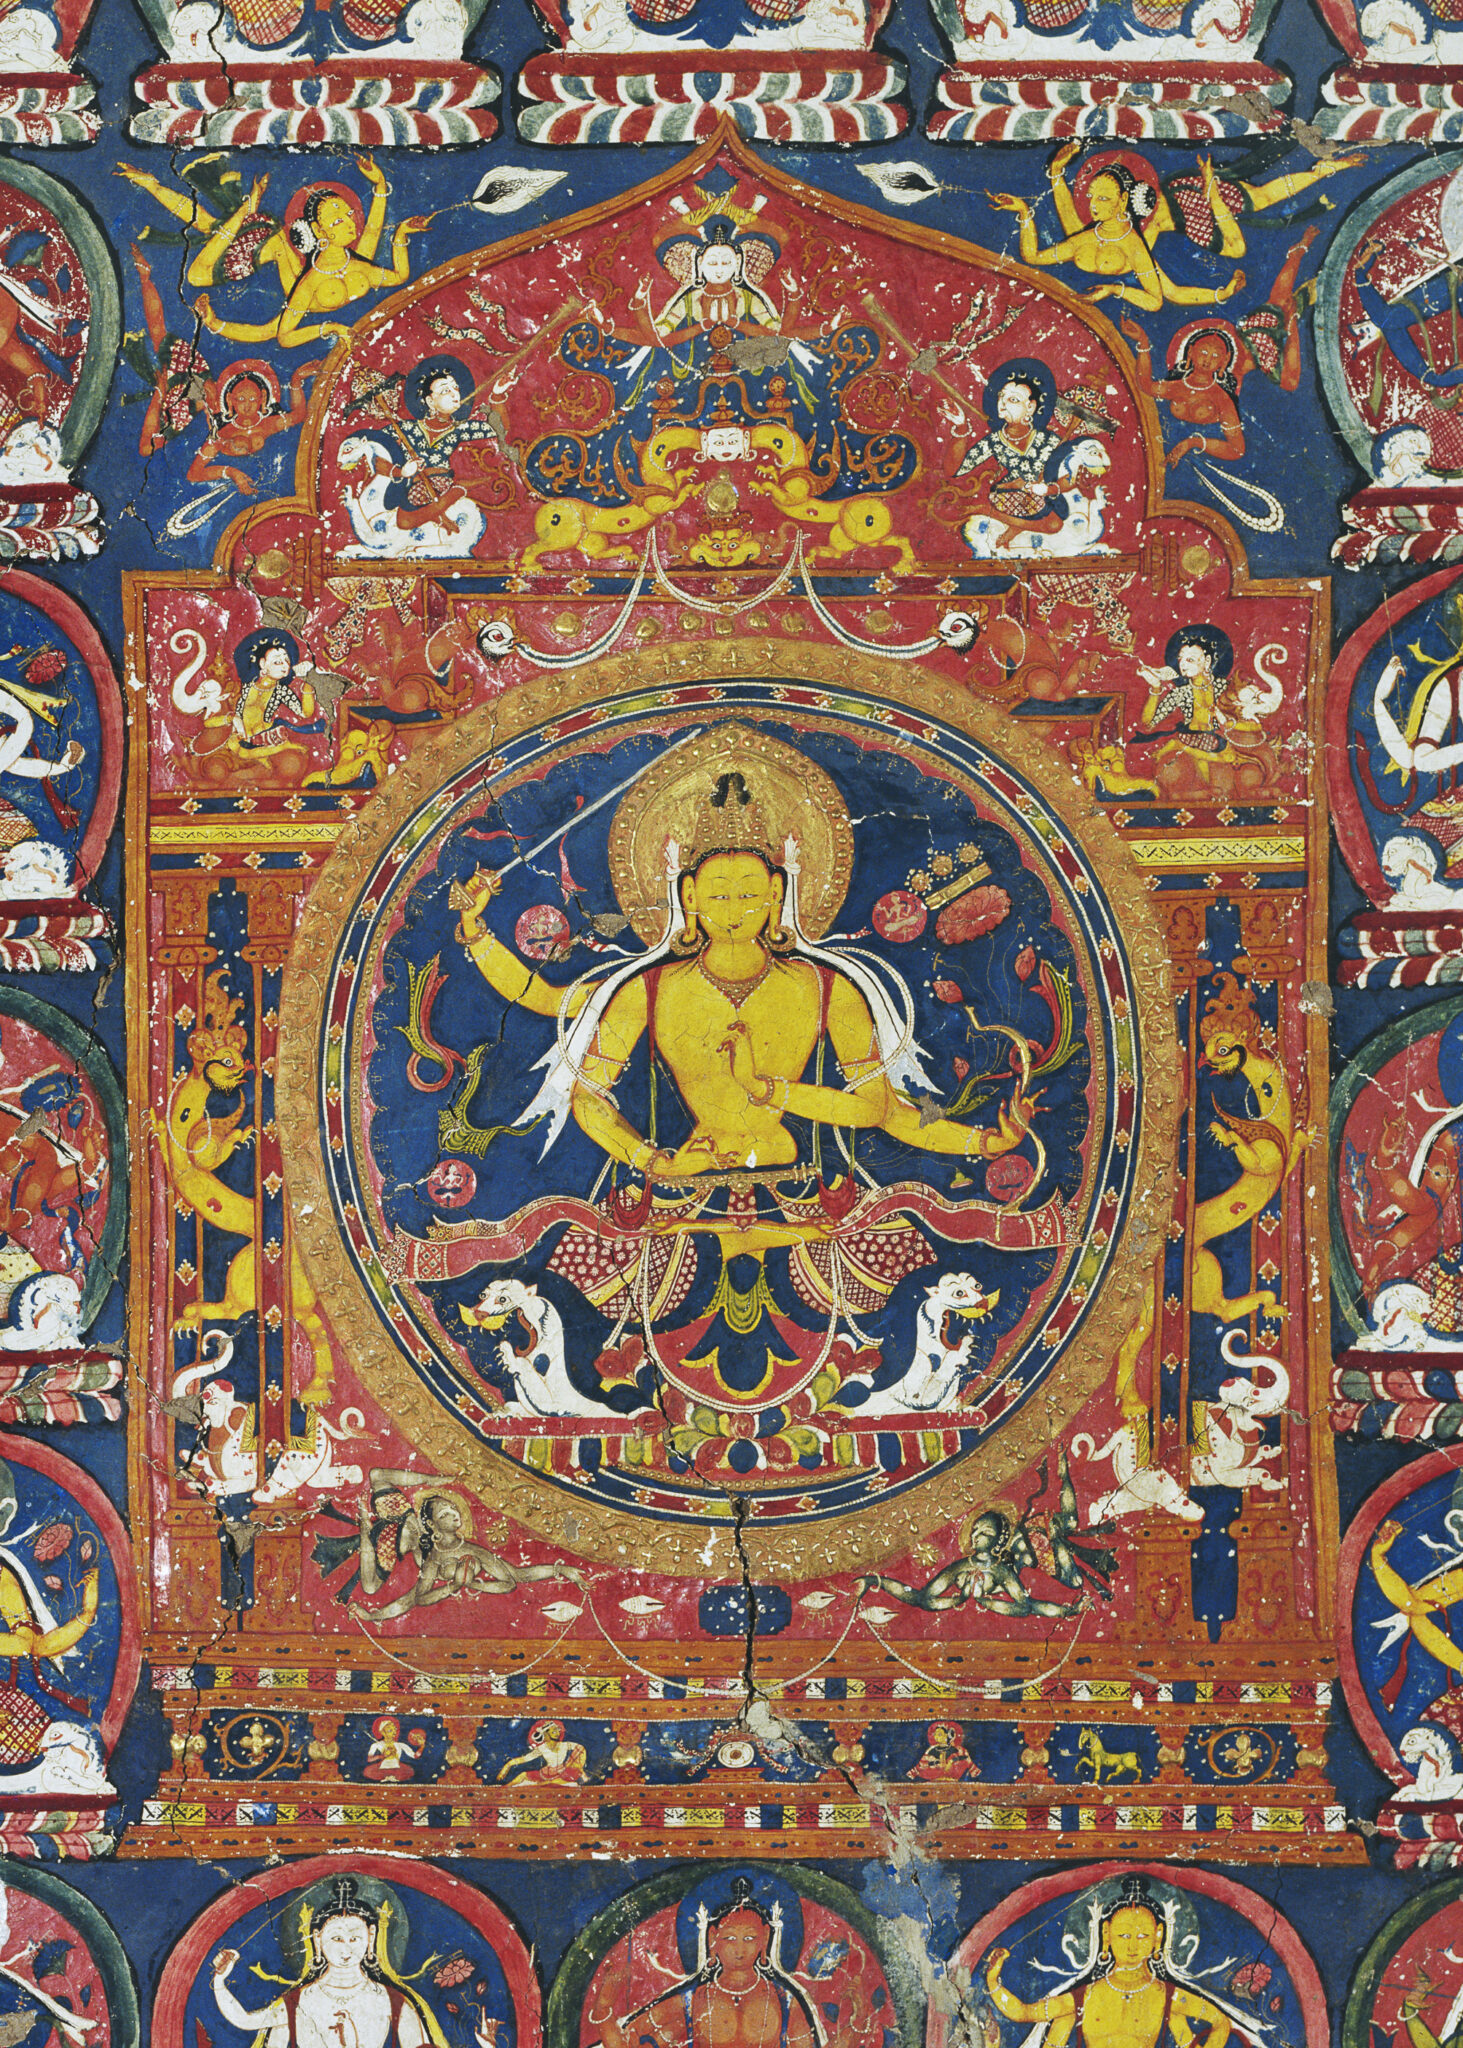 Yellow-skinned deity seated at center of mandala decorated with deity portraits, animals, and apsaras (flying divinities)